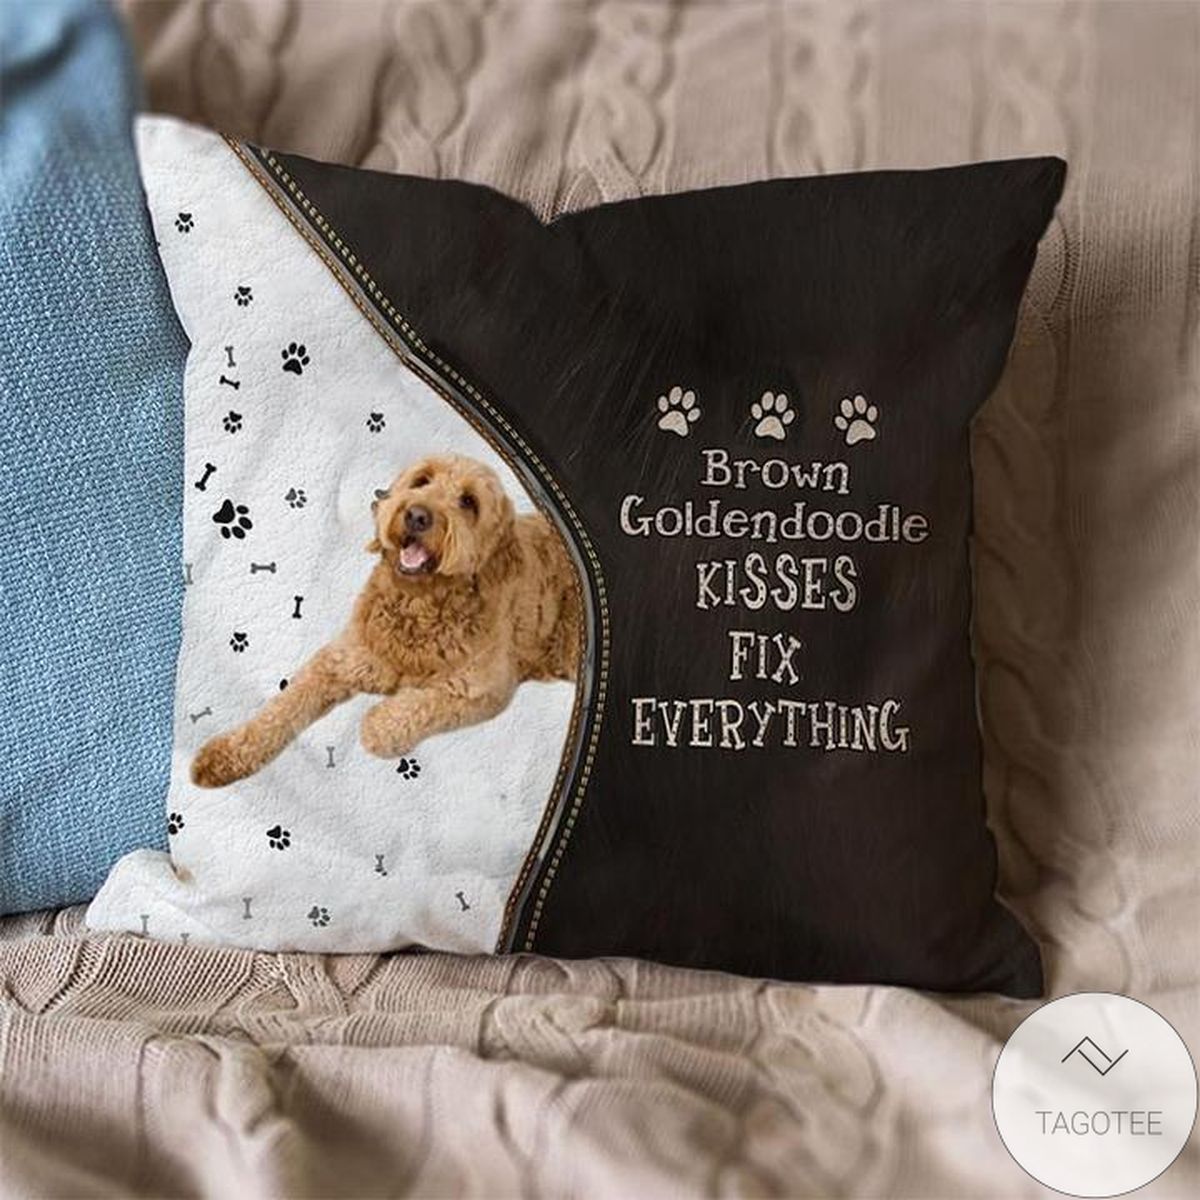 Brown Goldendoodle Kisses Fix Everything Pillowcase